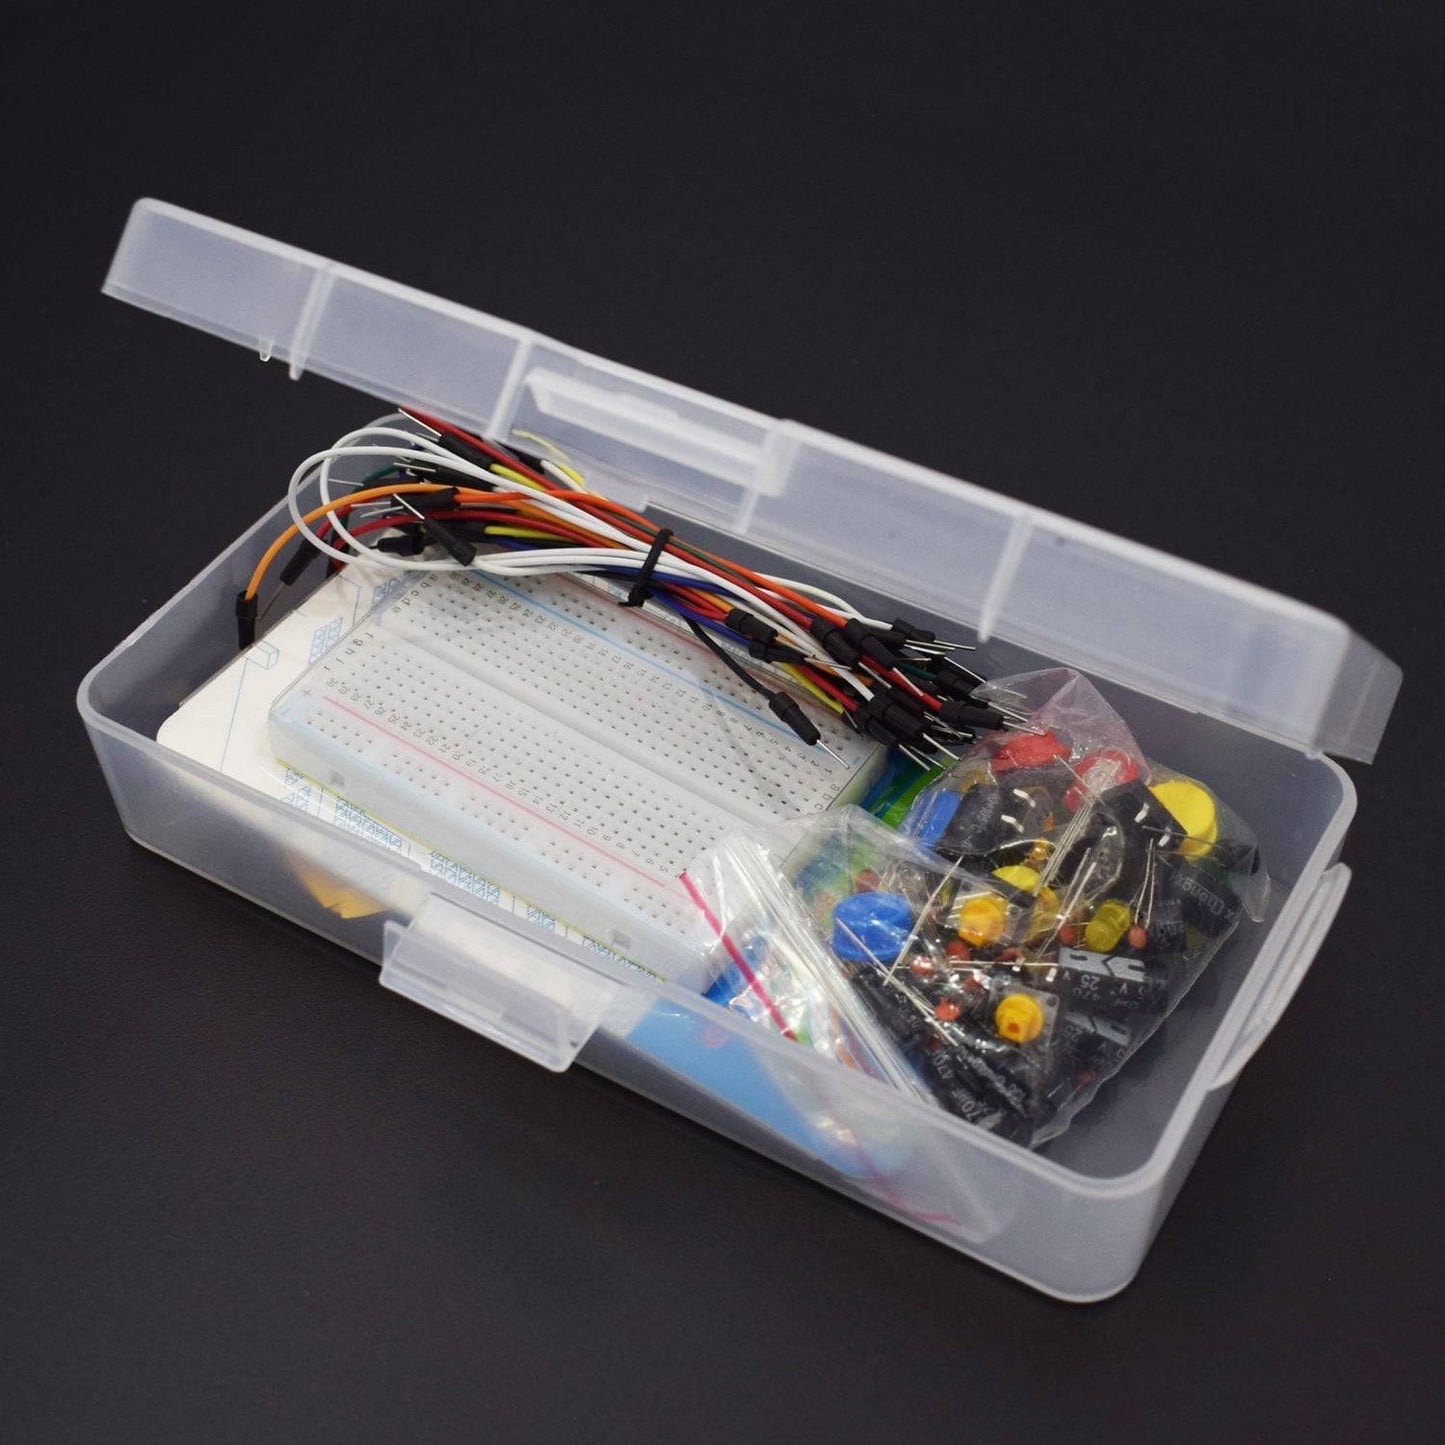 Electronic Component  Starter Kit for Arduino Resistor, LED, Capacitor, Jumper Wires Kit with Retail Box - RS1141 - REES52